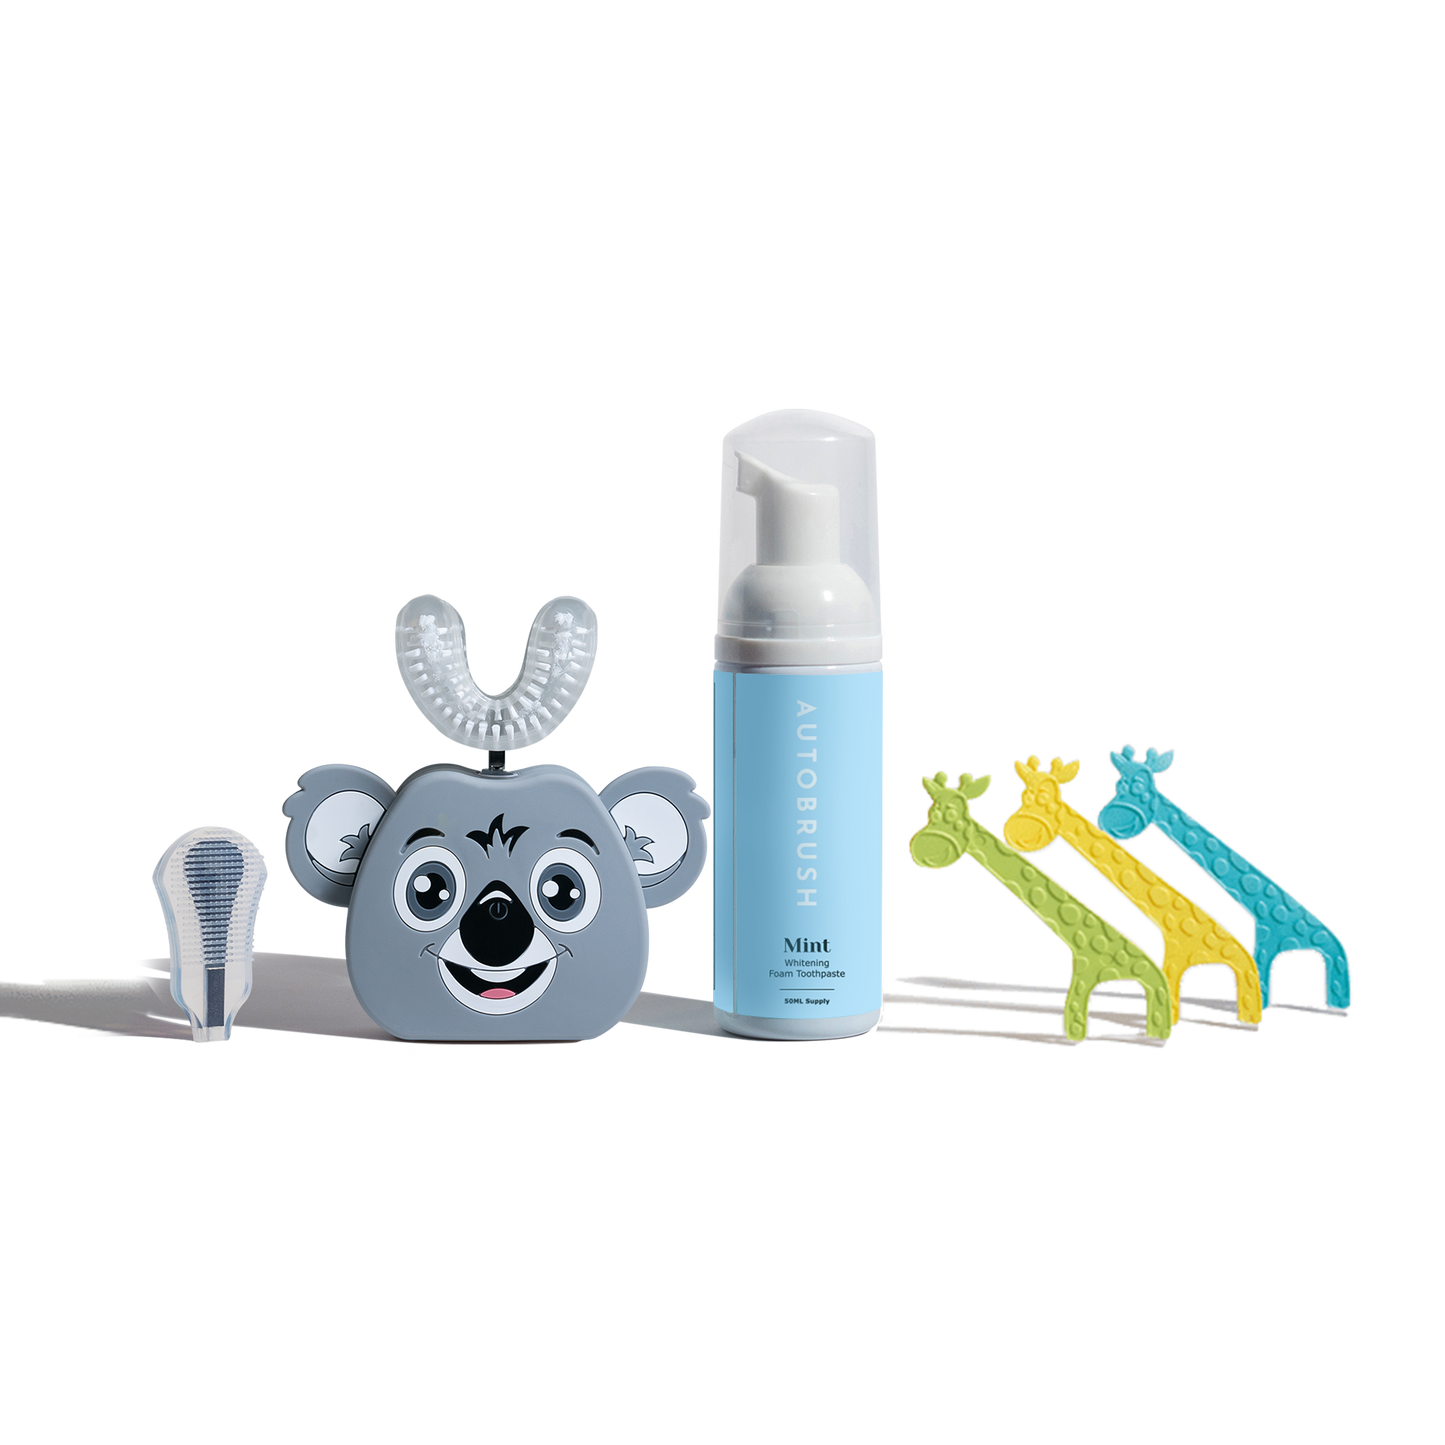 autobrush®: Sonic Kids Total Package